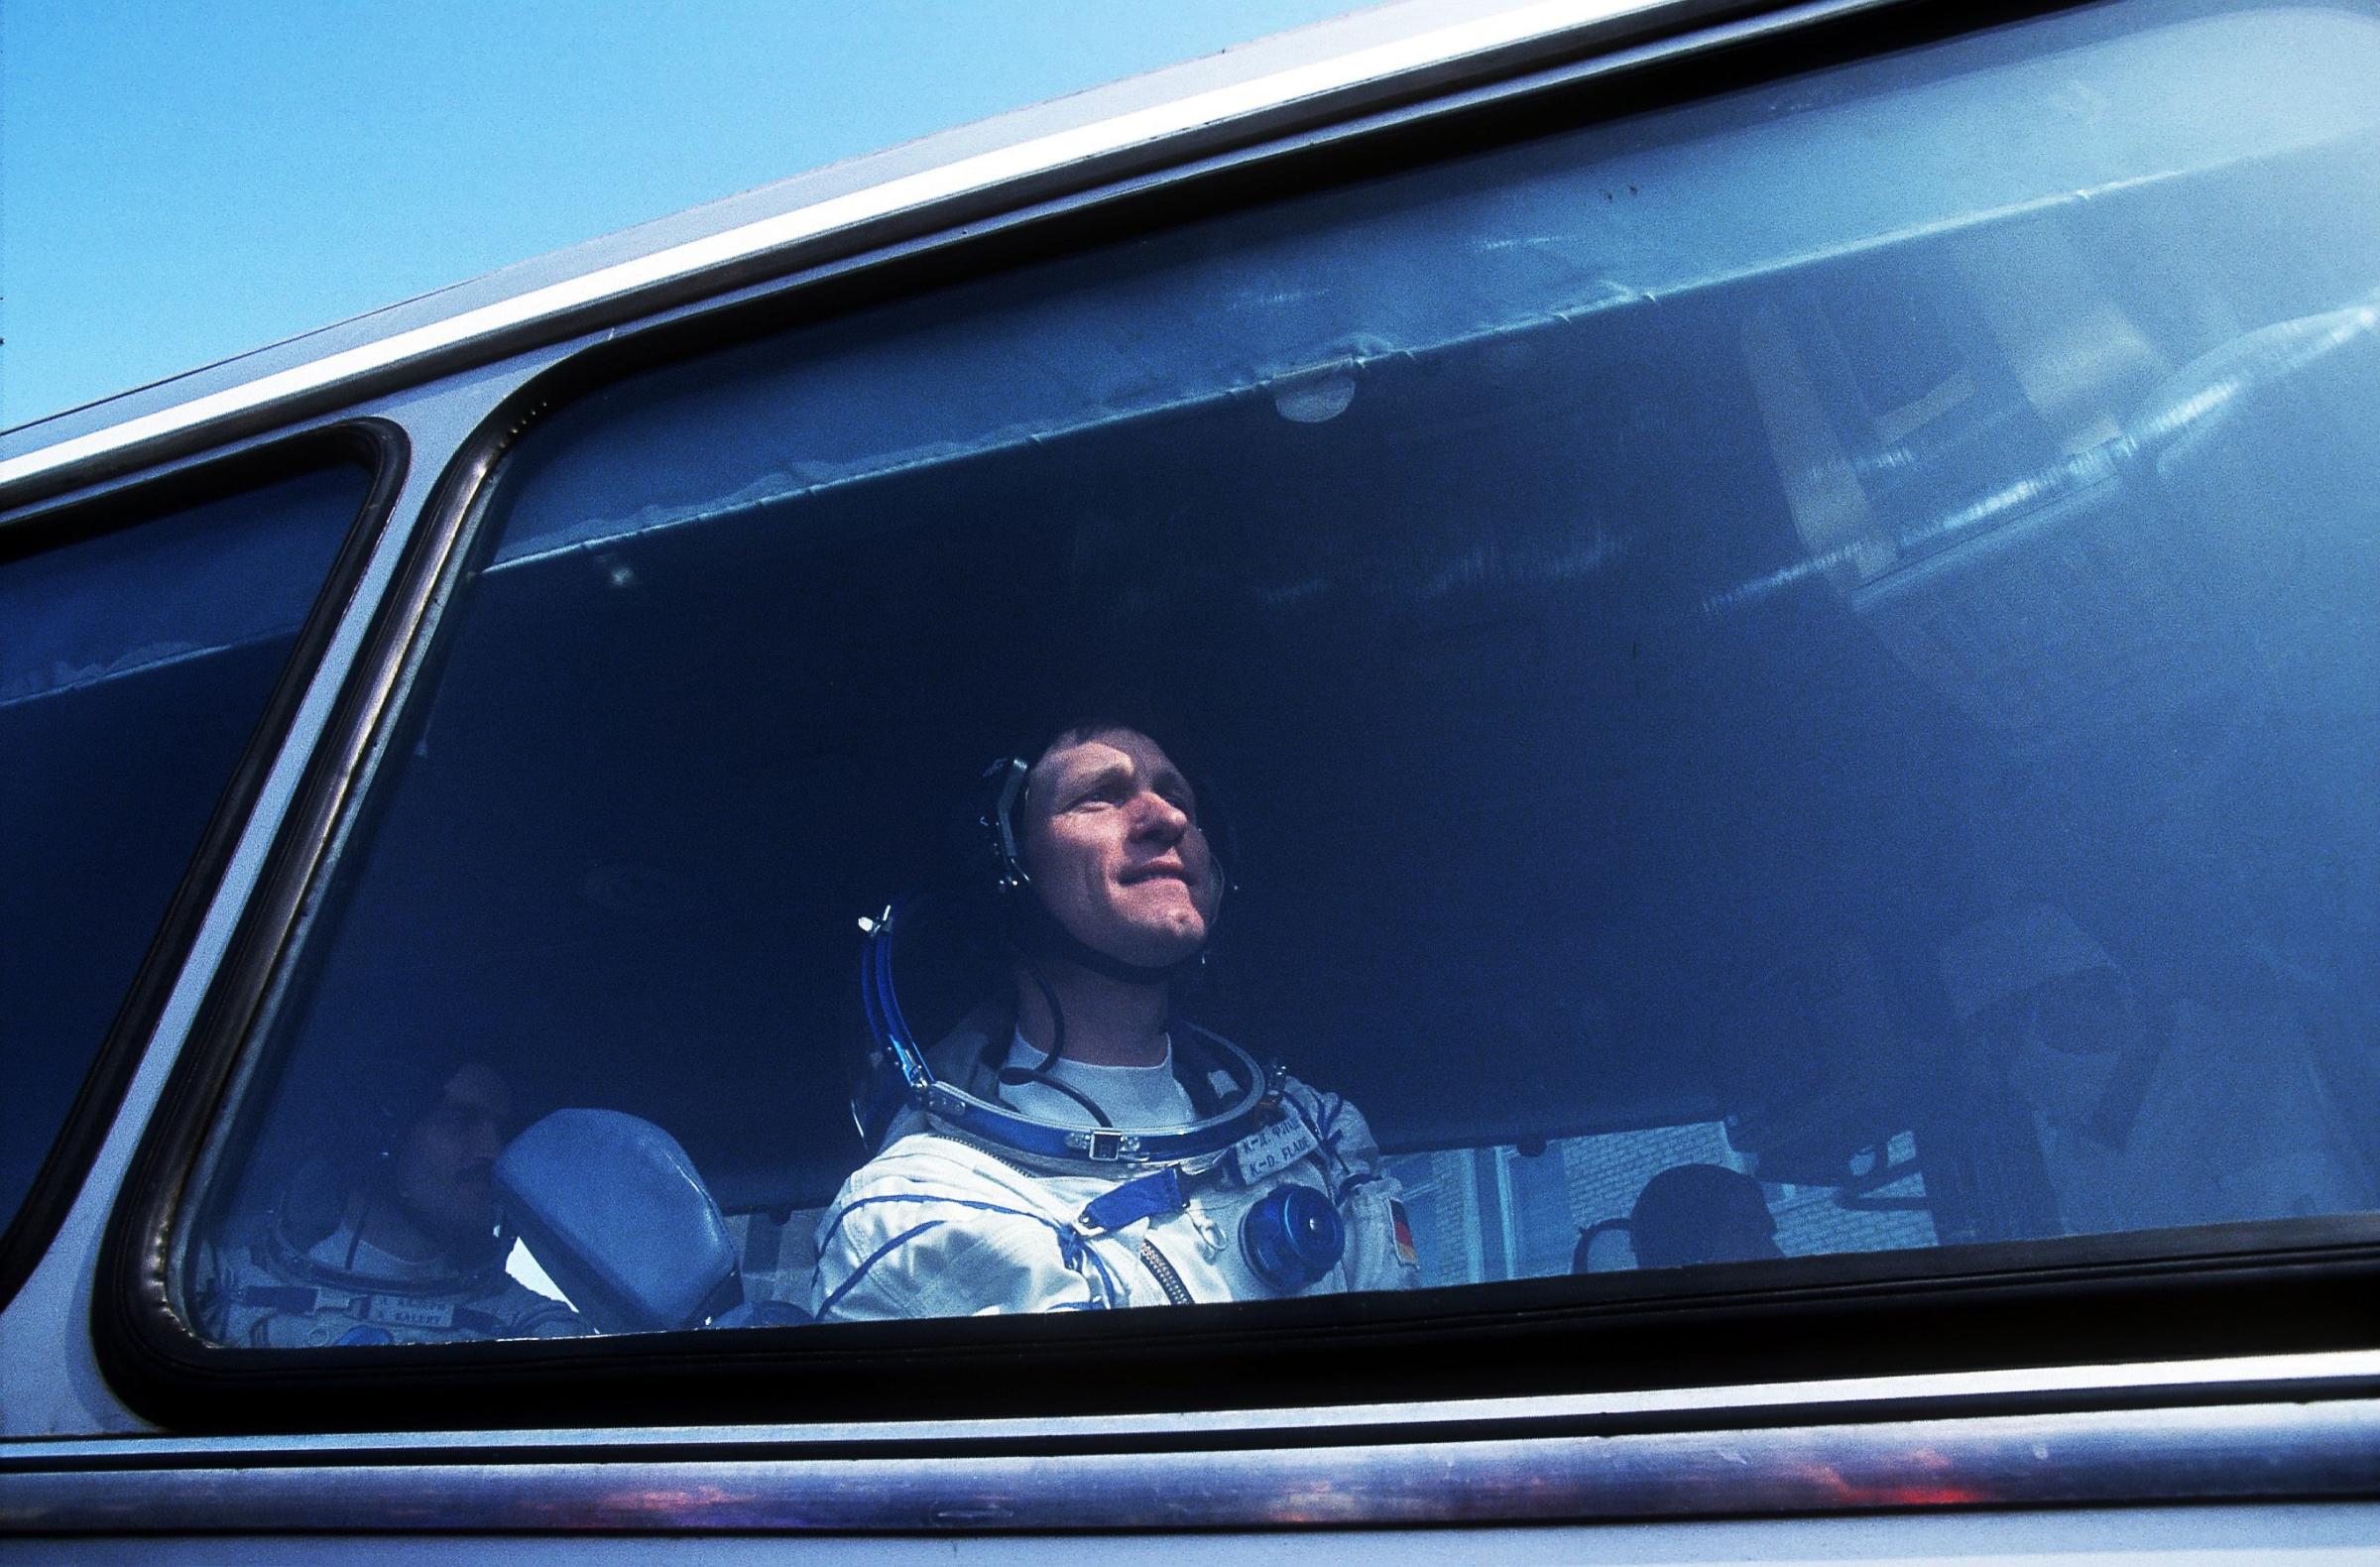 German astronaut Klaus Dietrich Flade looks out of the window of a bus that brings him and Russian cosmonauts to the spacecraft that will take them to the Mir space station, on March 17, 1992, in Baikonur, Kazakhstan. The Soyuz TM-14 spacecraft left the Baikonur Cosmodrome in Kazakhstan on March 17 and docked at the Kvant rear port of the MIR on March 19, returning to earth after almost 8 days in space, on March 25, 1992. The MIR (Russian word for Peace, World), was a space station operated by the Soviet Union, and later by the Russian Confederation. It was built between 1986 and 1996 and operated for fifteen years until March 23, 2001. It holds the record for the longest continuous presence in space, eight days short of ten years. In its fifteen year lifespan it was occupied for a total of twelve and a half years. The station was made accessible for astronauts and cosmonauts from thirteen different nations.